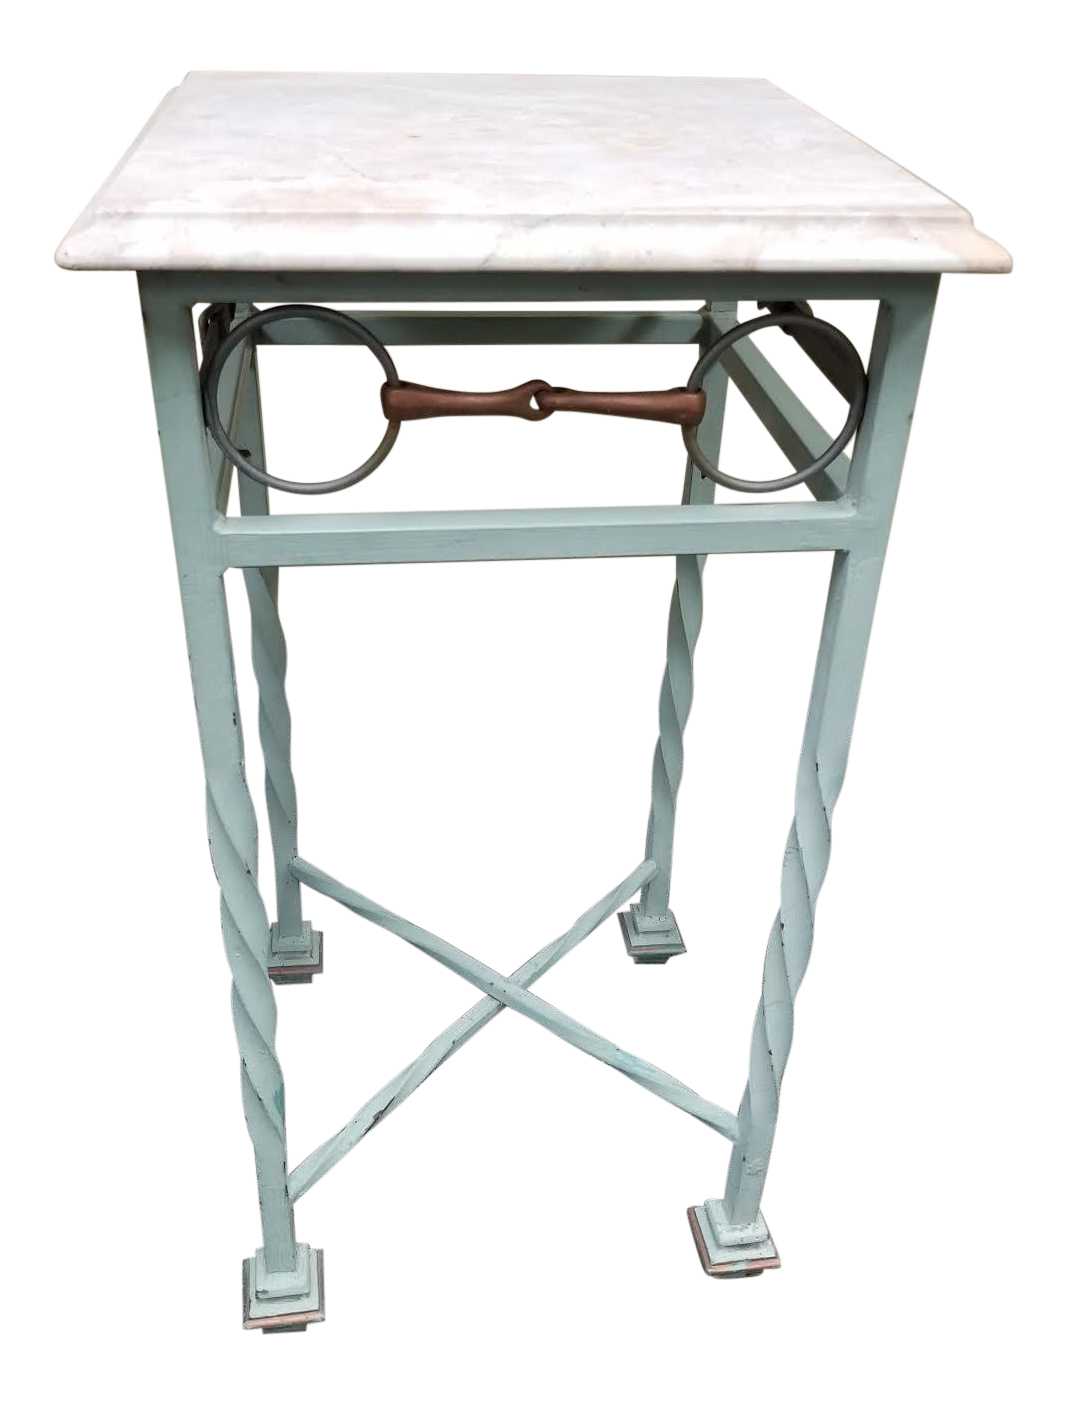 vintage used marble side tables chairish century american classical iron and equestrian themed table pink accent ikea bath rugs turquoise furniture antique oak with drawer pottery